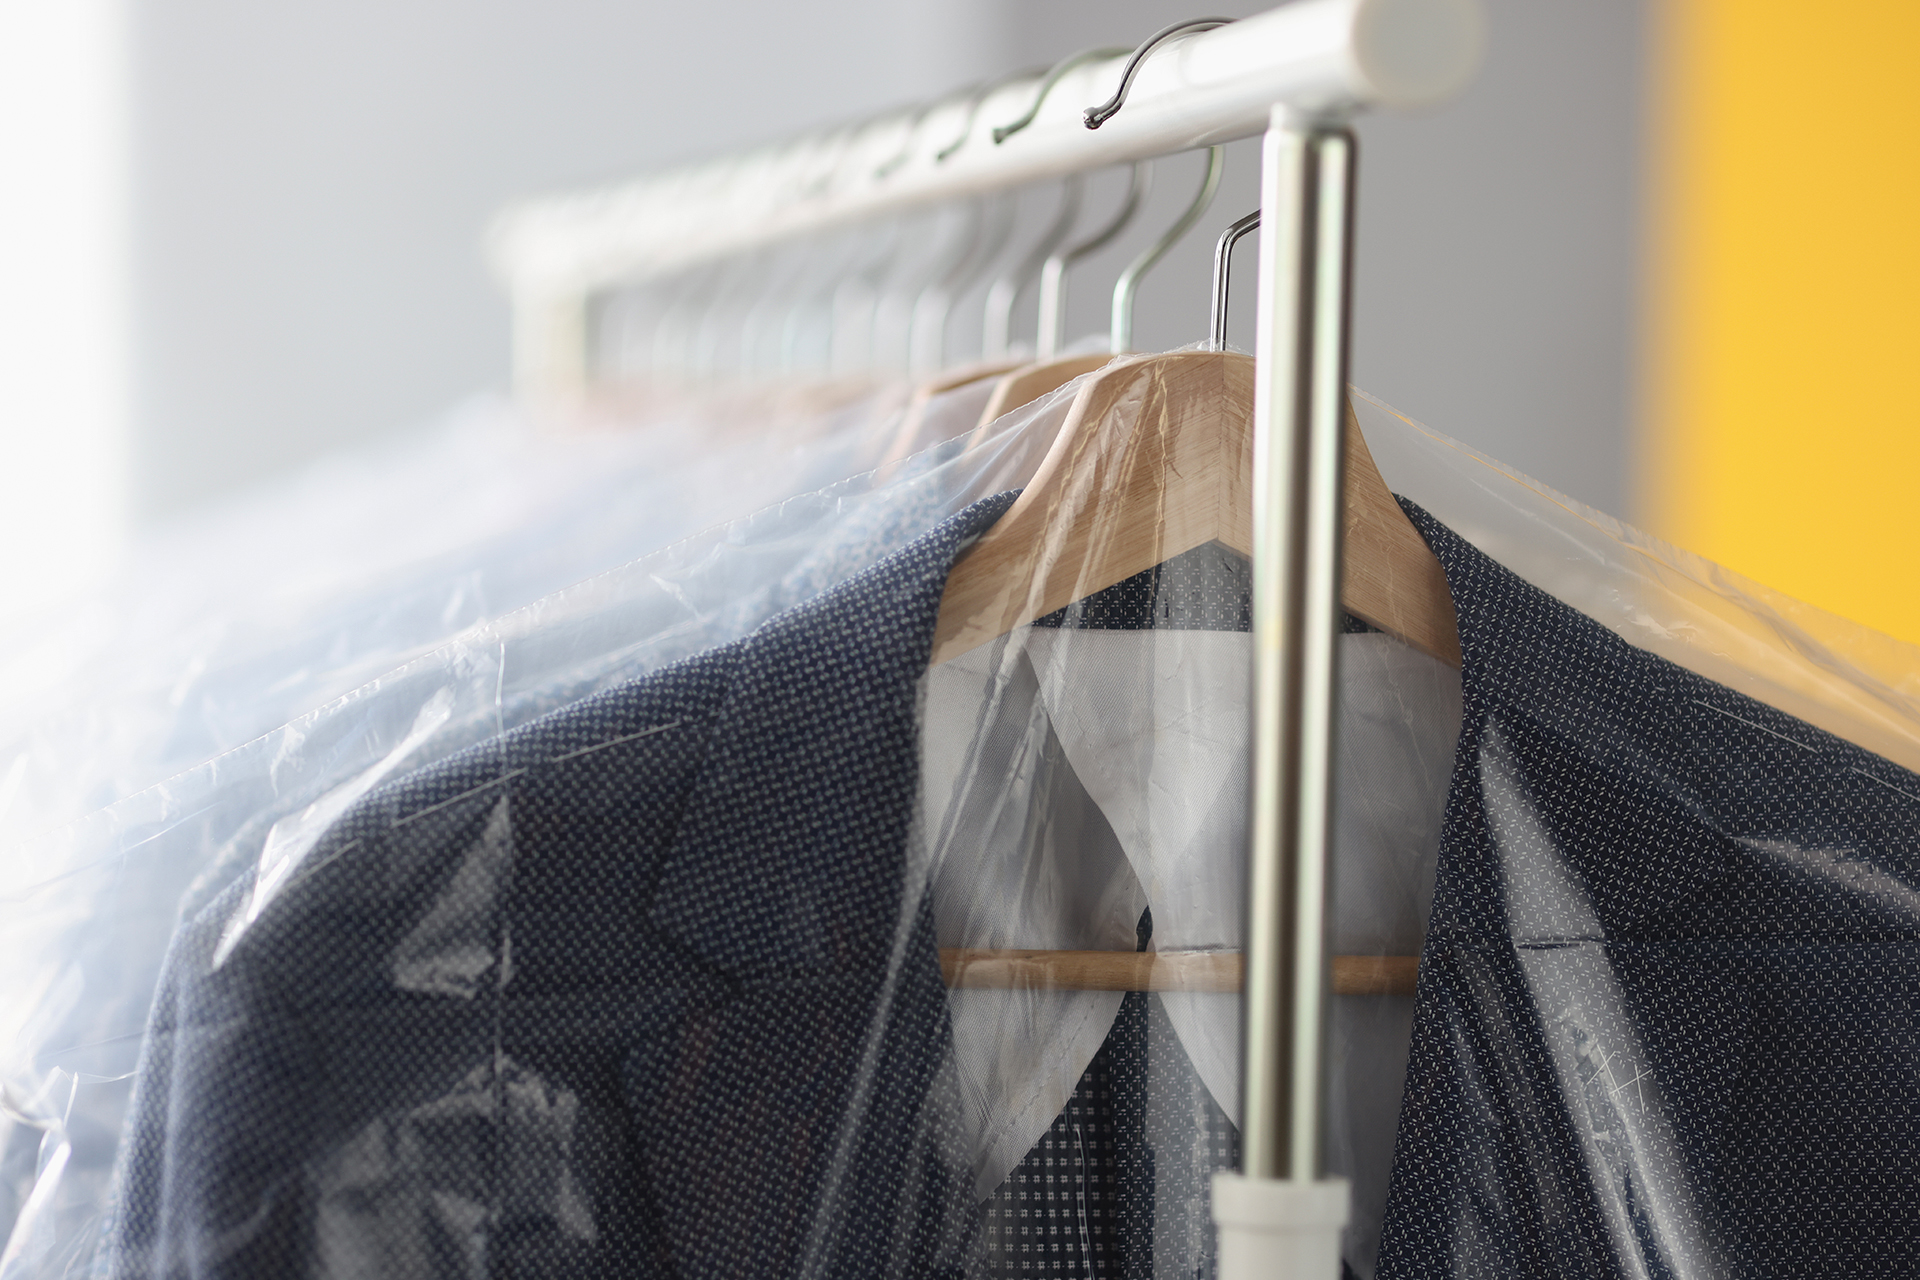 It's recommended to dry-clean your suit before long-term storage